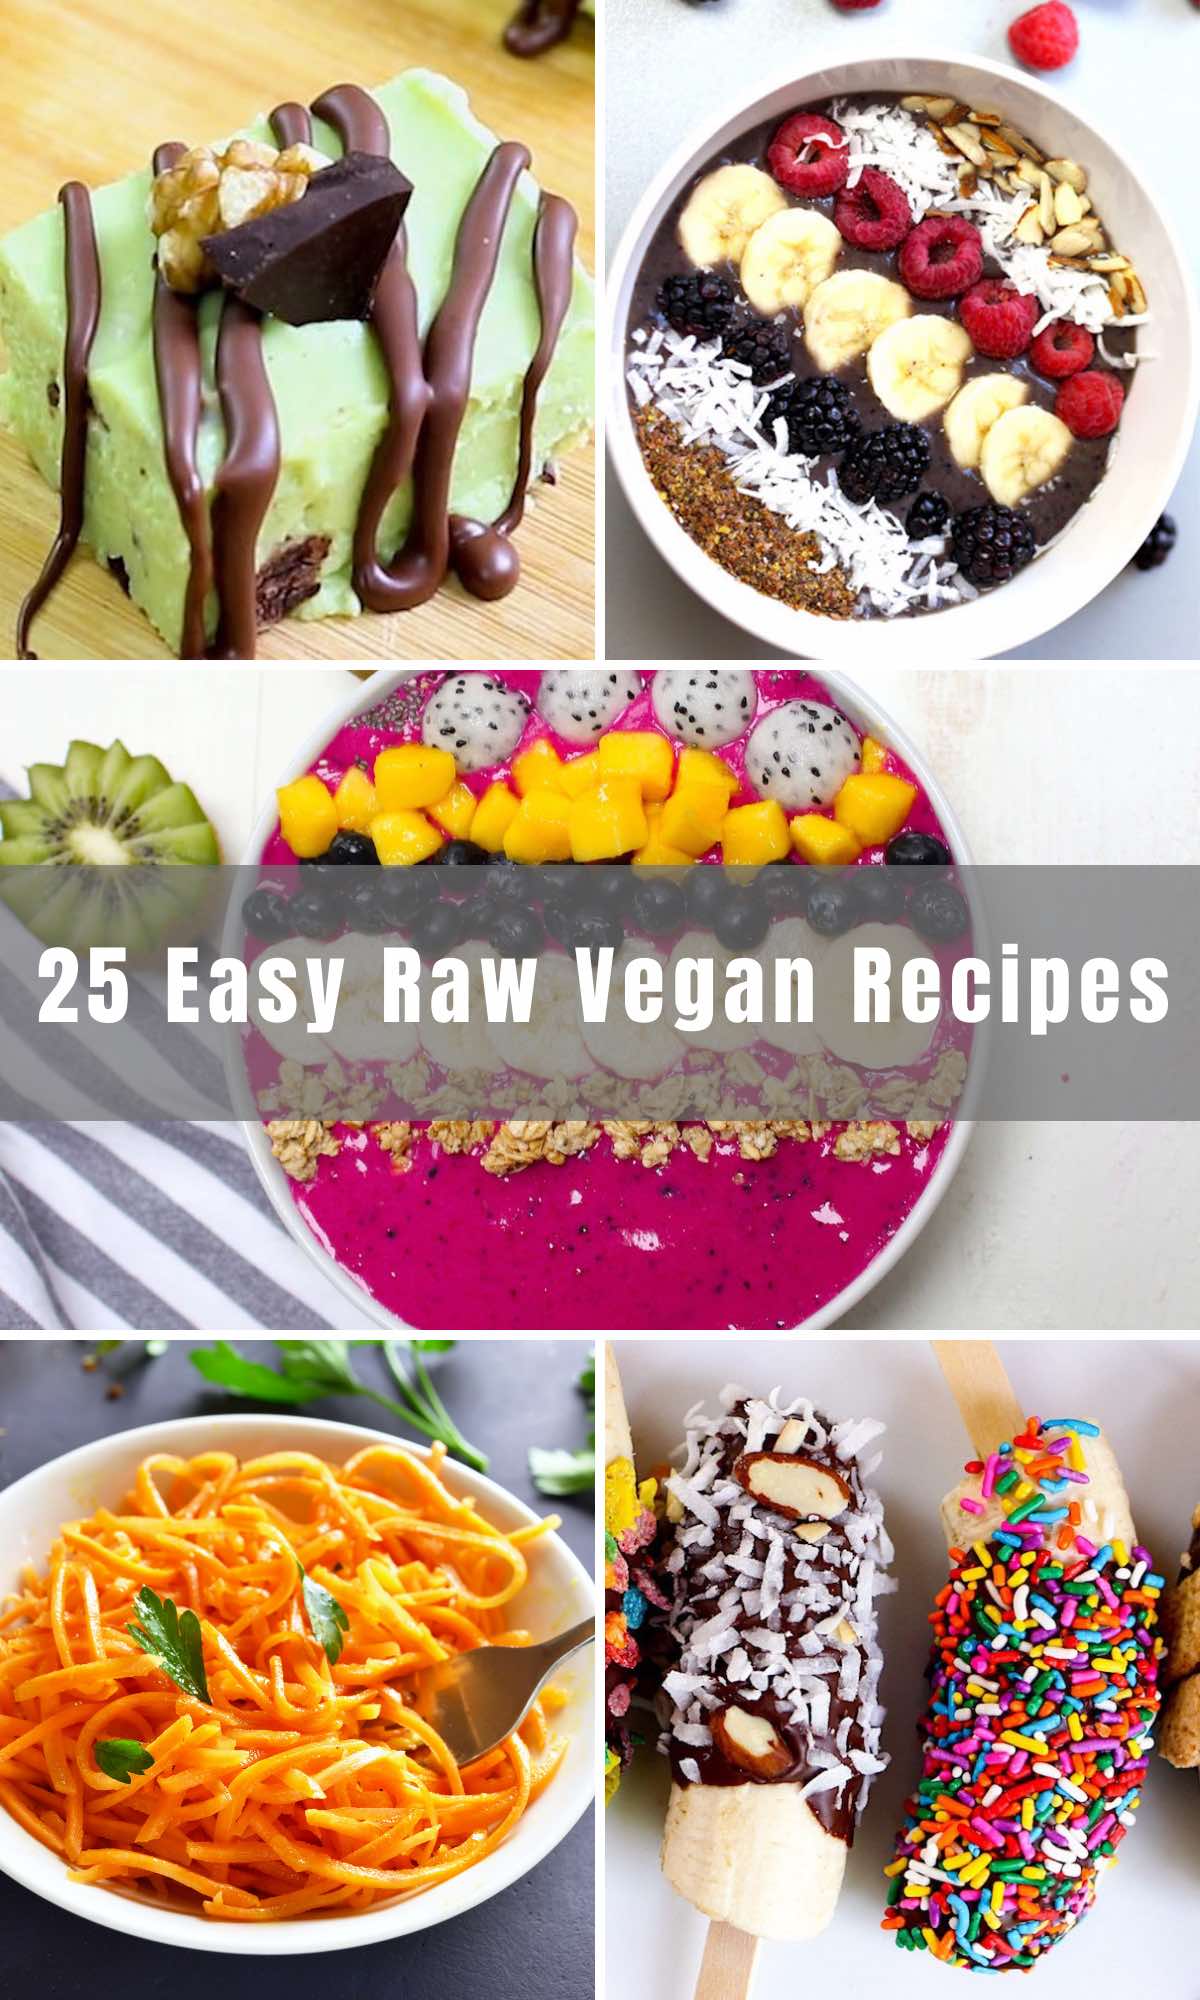 With a raw vegan diet, you avoid more than just animal products, you also avoid the heating process!  Does it get any better than that? We've rounded up 25 Raw Vegan Recipes that are incredibly easy to make! These plant-based meals are healthy, delicious, and satisfying.